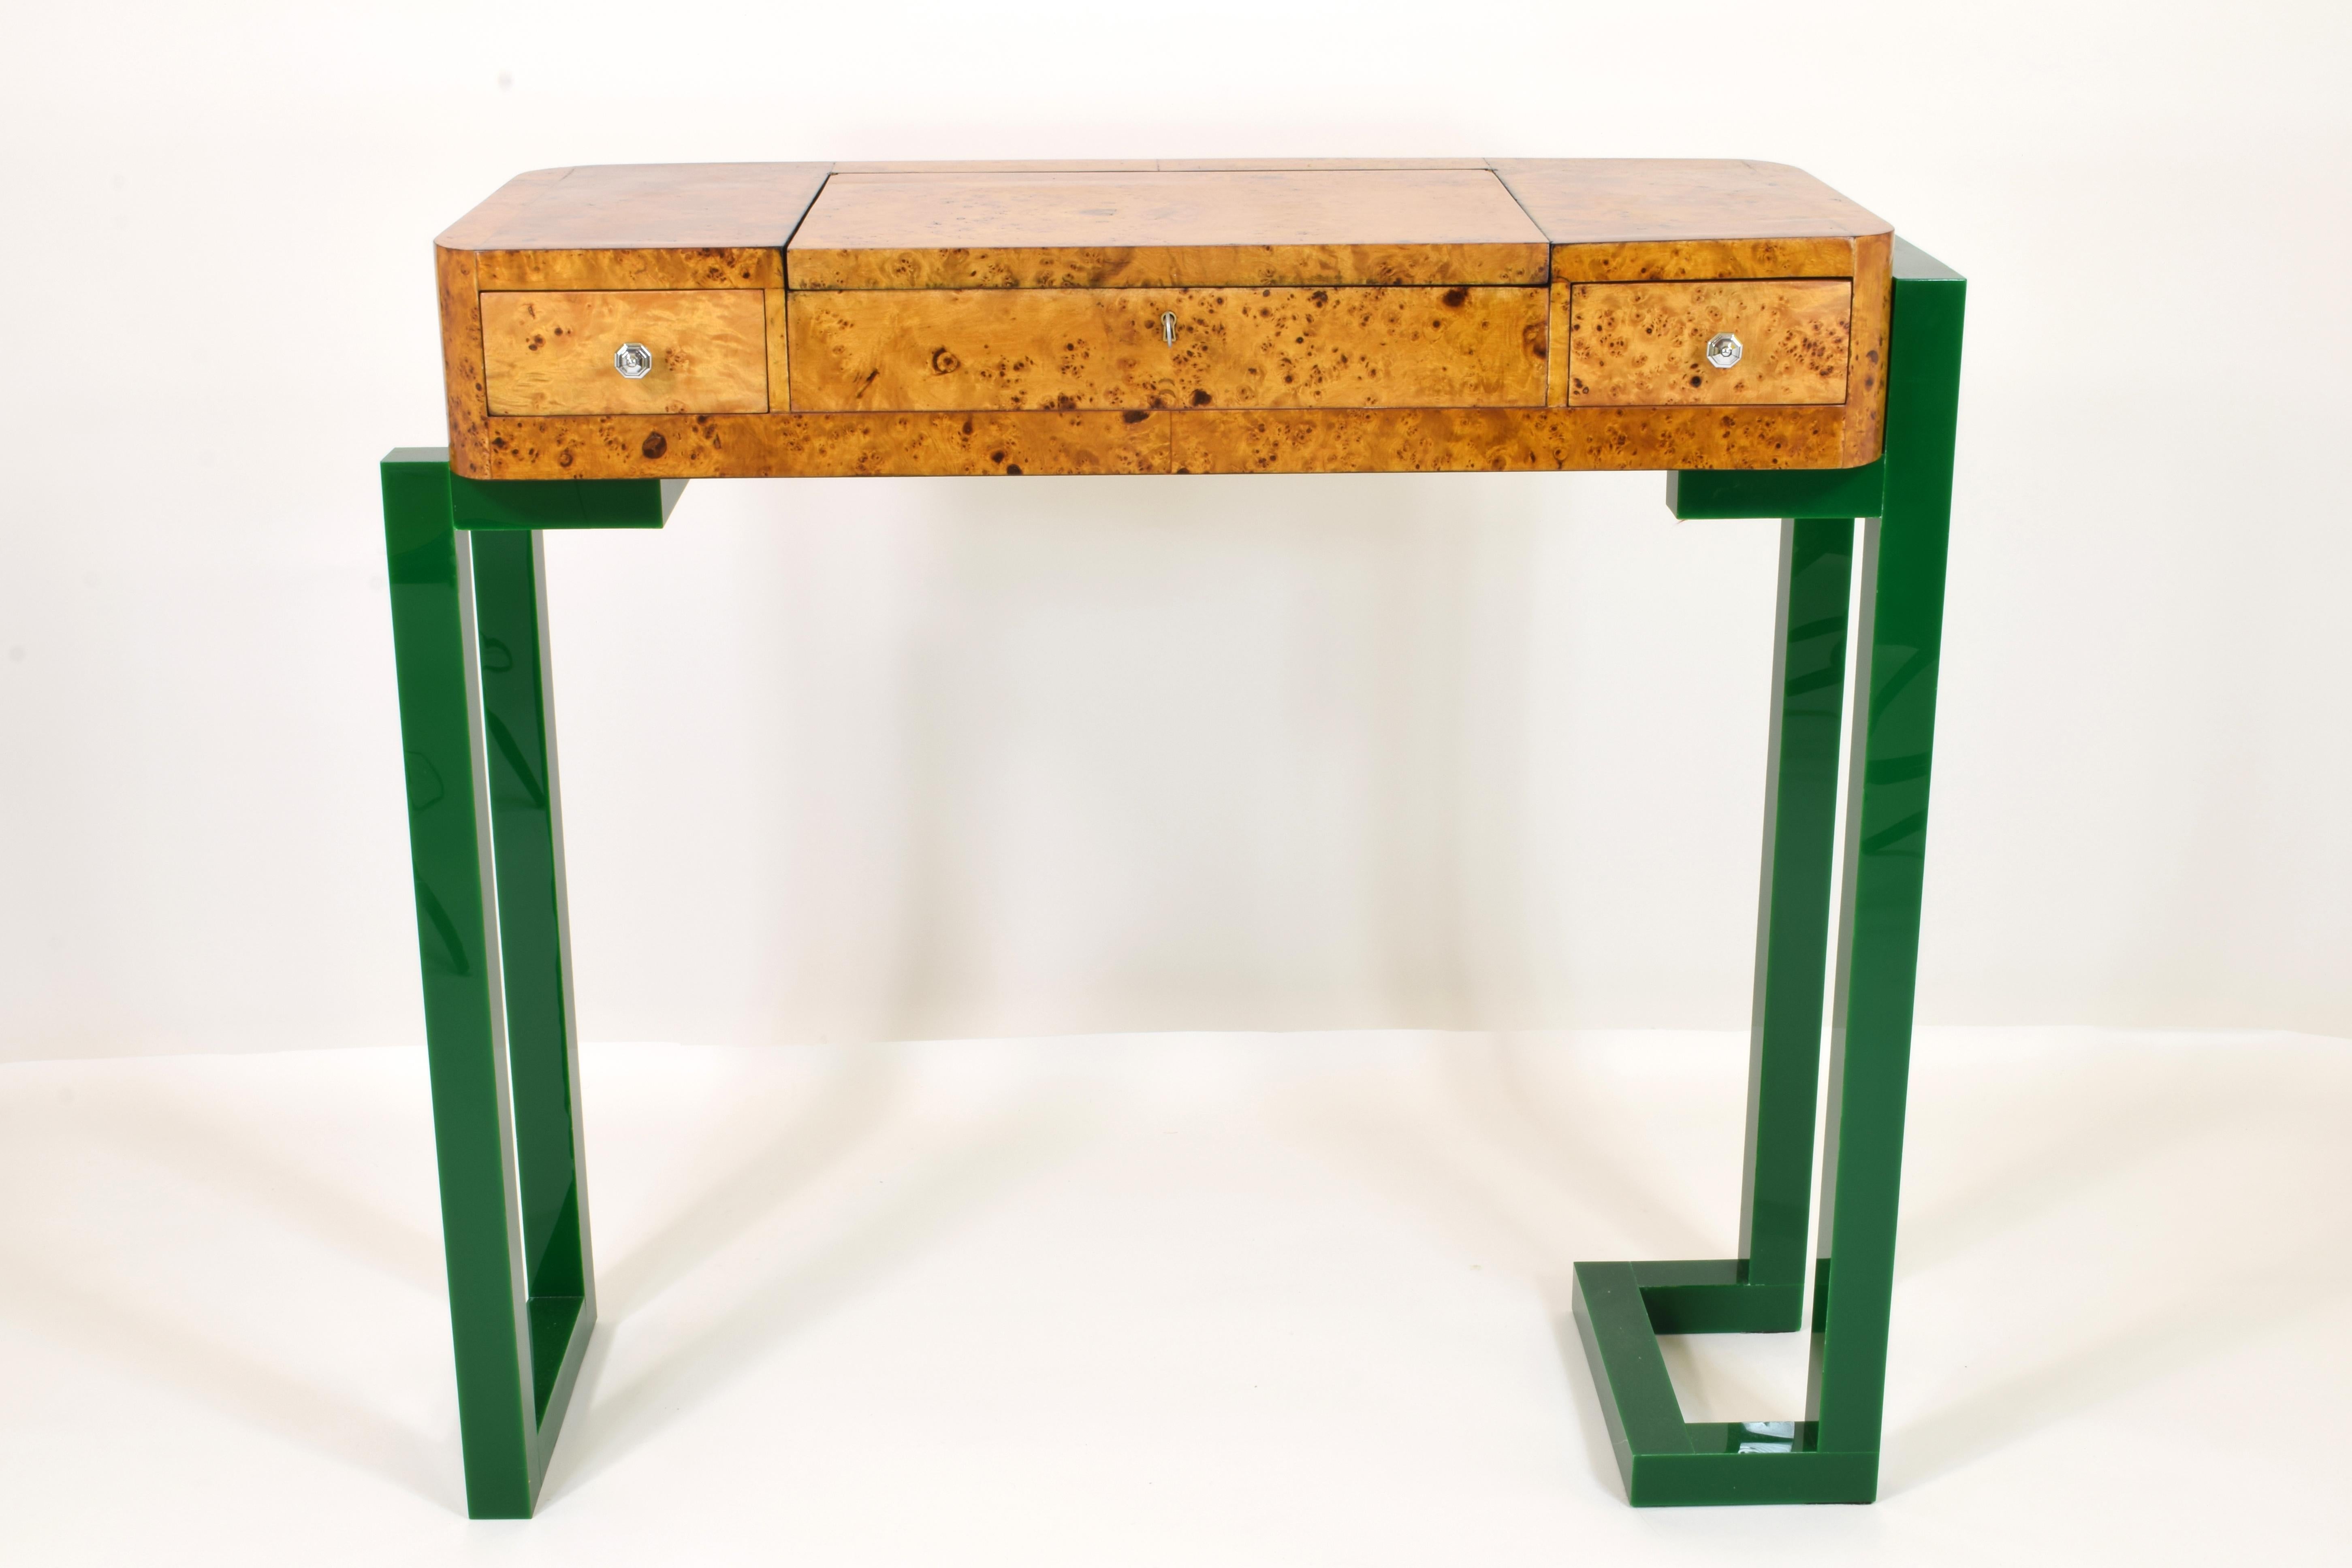 “Flamant Vert” console from the “Trasformatio” collection, design Michele Iodice exclusively for the Esprit Nouveau Gallery.

LIMITED EDITION 1/1

Small dressing table in poplar briar with an eyelet from the 1930s transformed into a console with